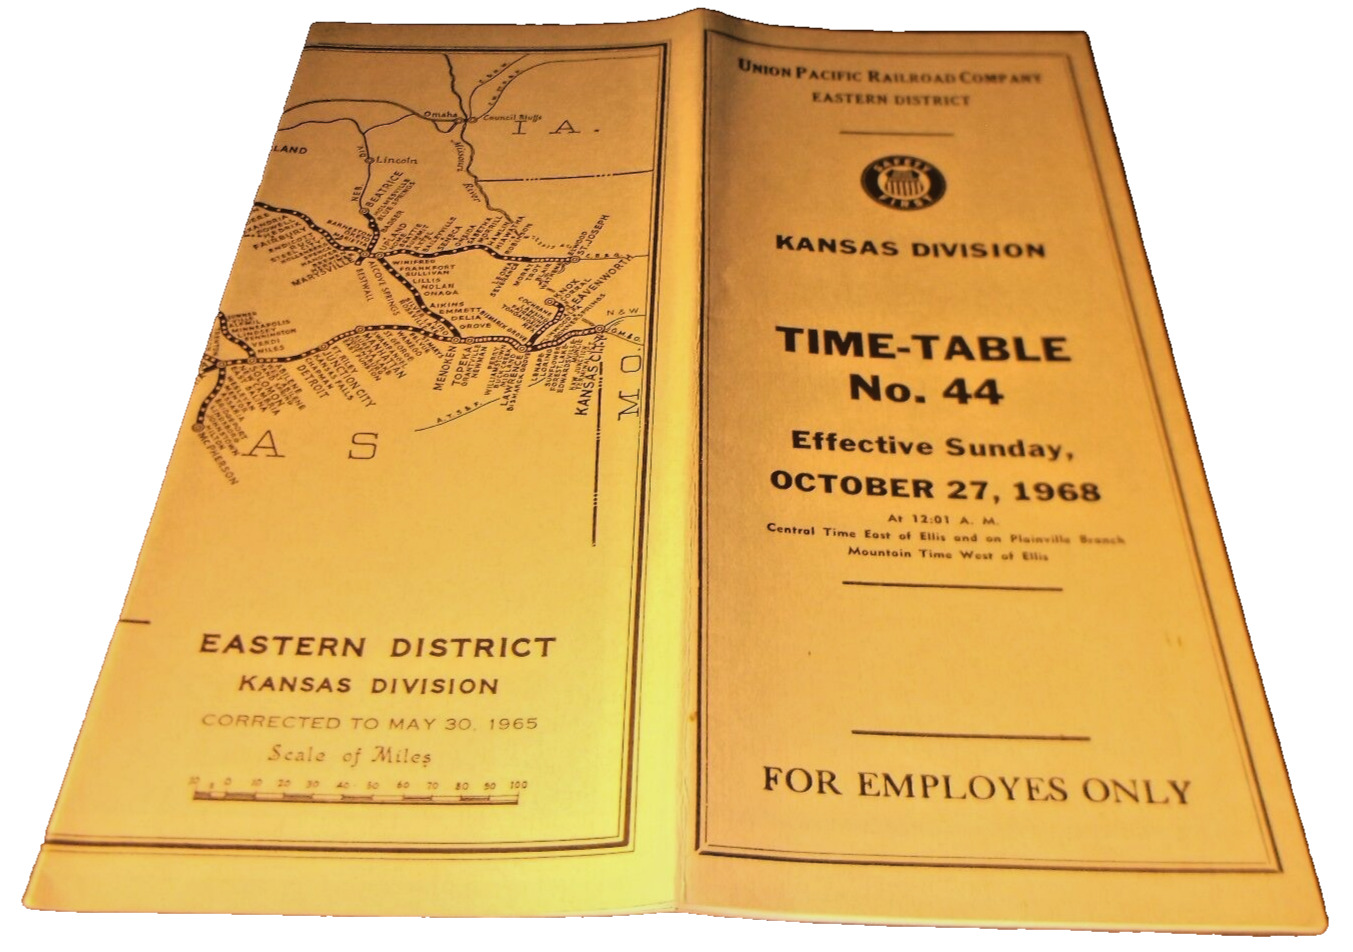 OCTOBER 1968 UNION PACIFIC KANSAS DIVISION EMPLOYEE TIMETABLE #44